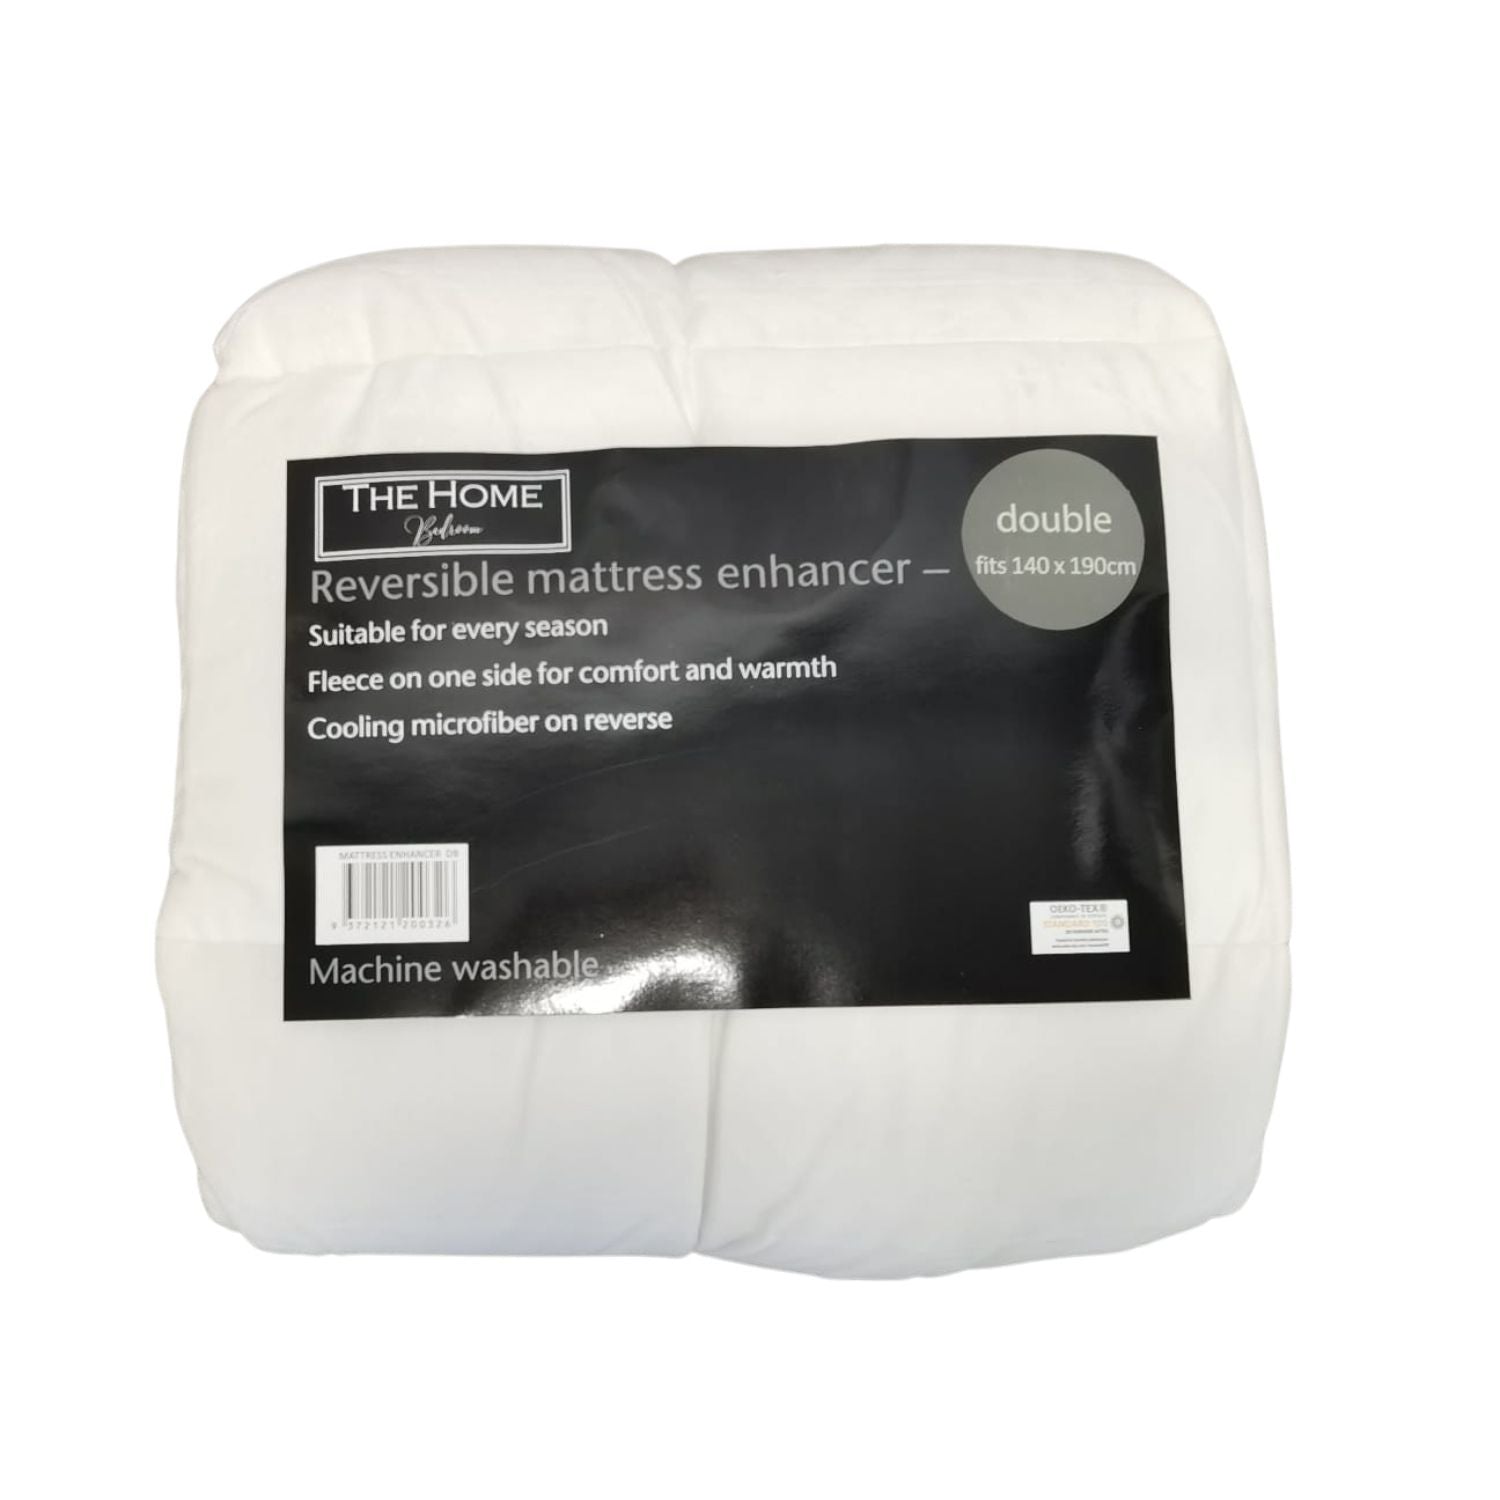 The Home Luxury Collection Plush Mattress Enhancer 1 Shaws Department Stores